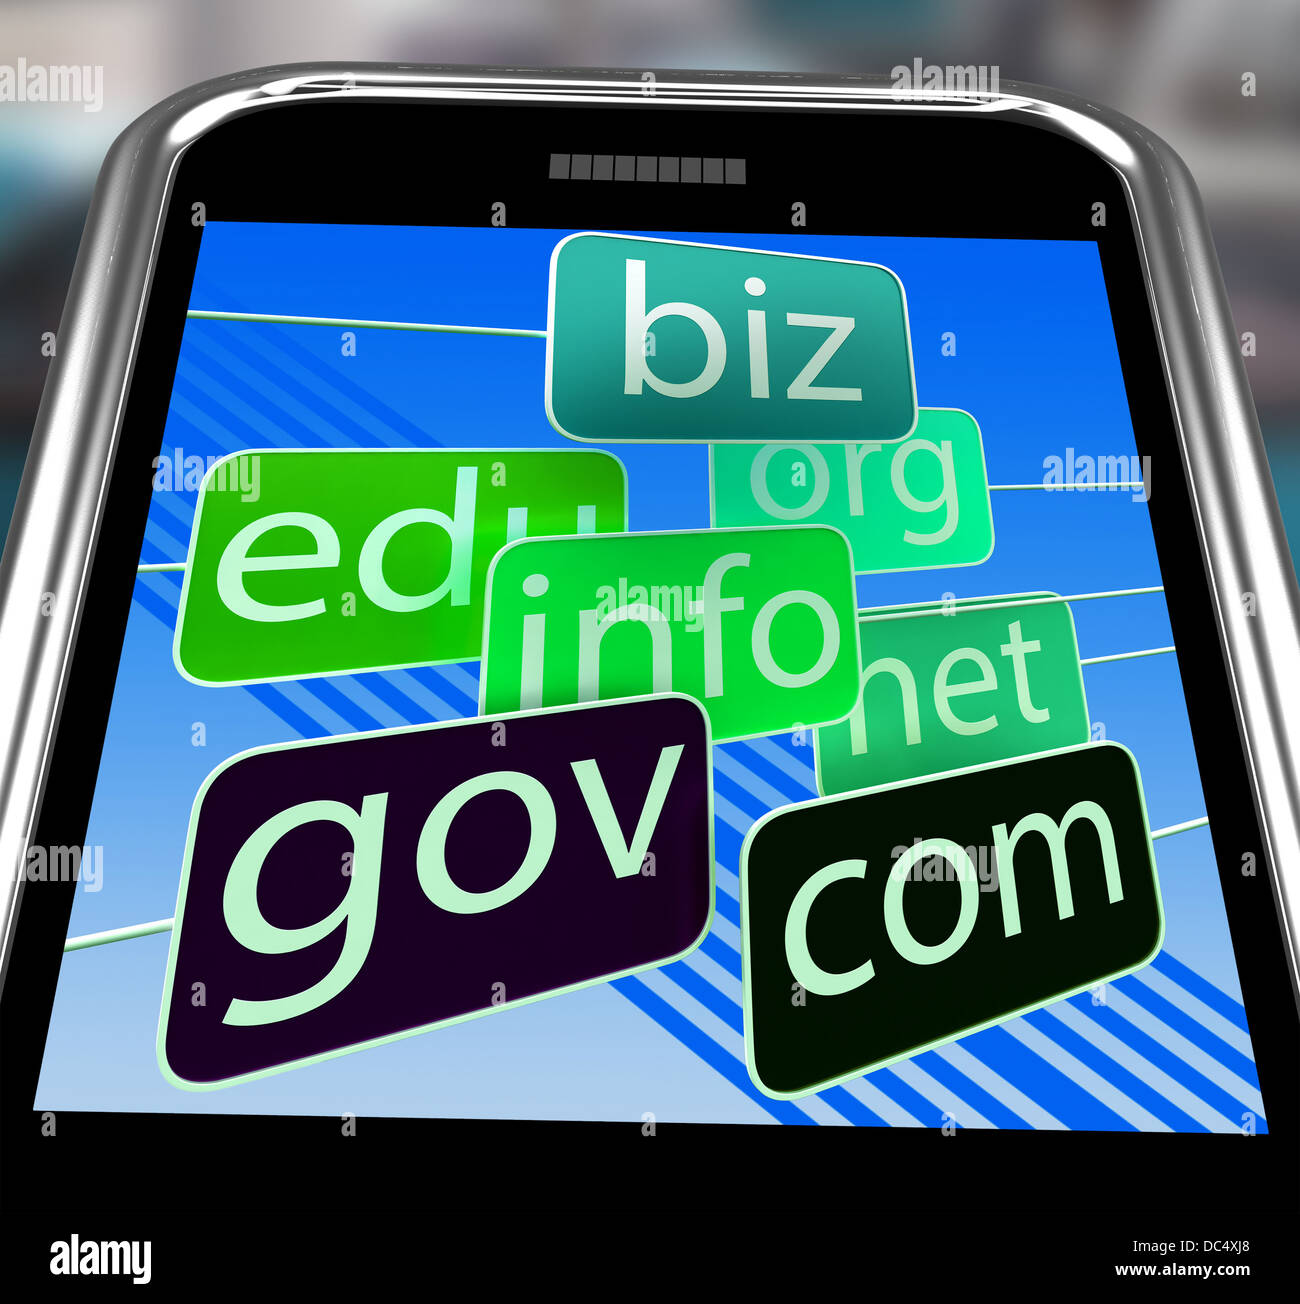 Domains On Smartphone Shows Mobile Internet Access Stock Photo